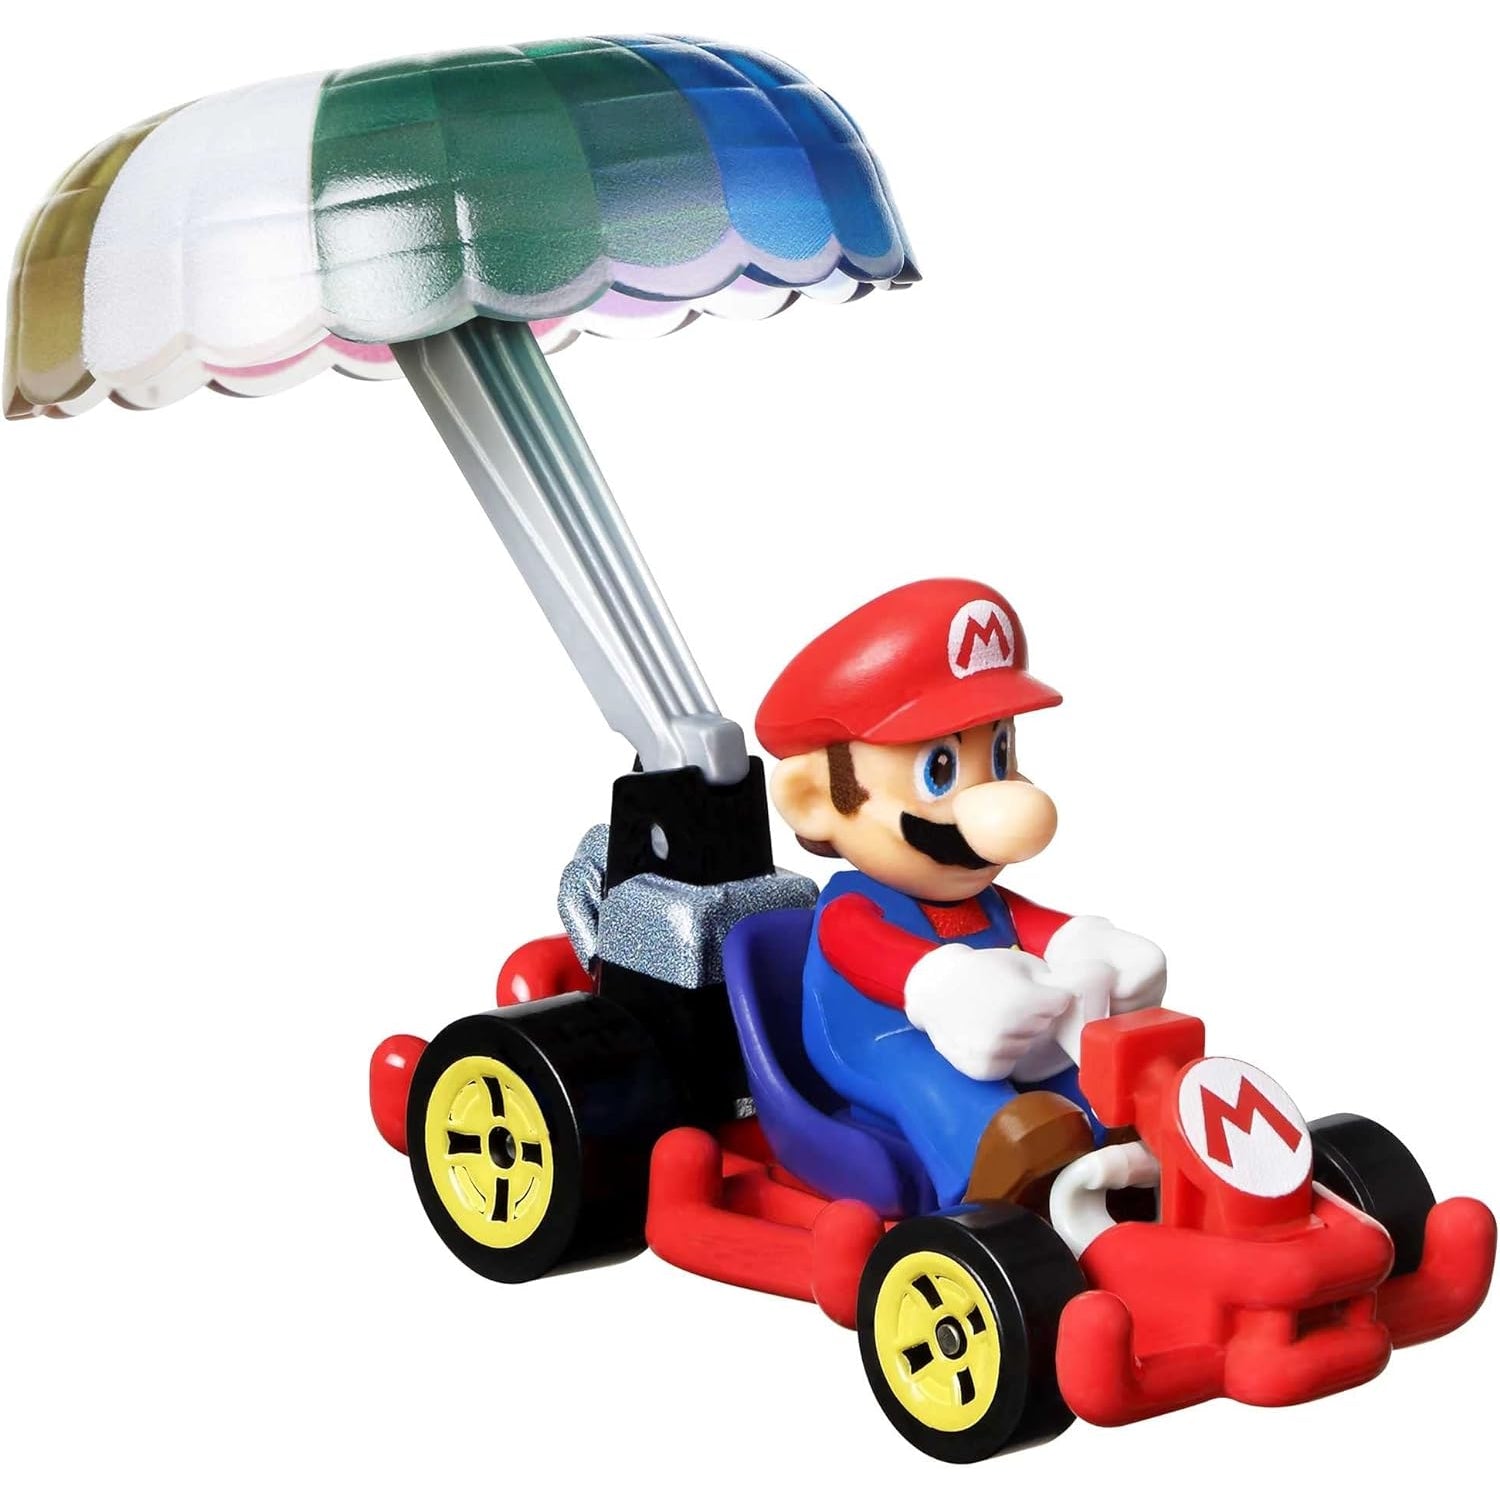 Mattel Super Mario Character Car 3-Packs with 3 Character Cars in 1 Set